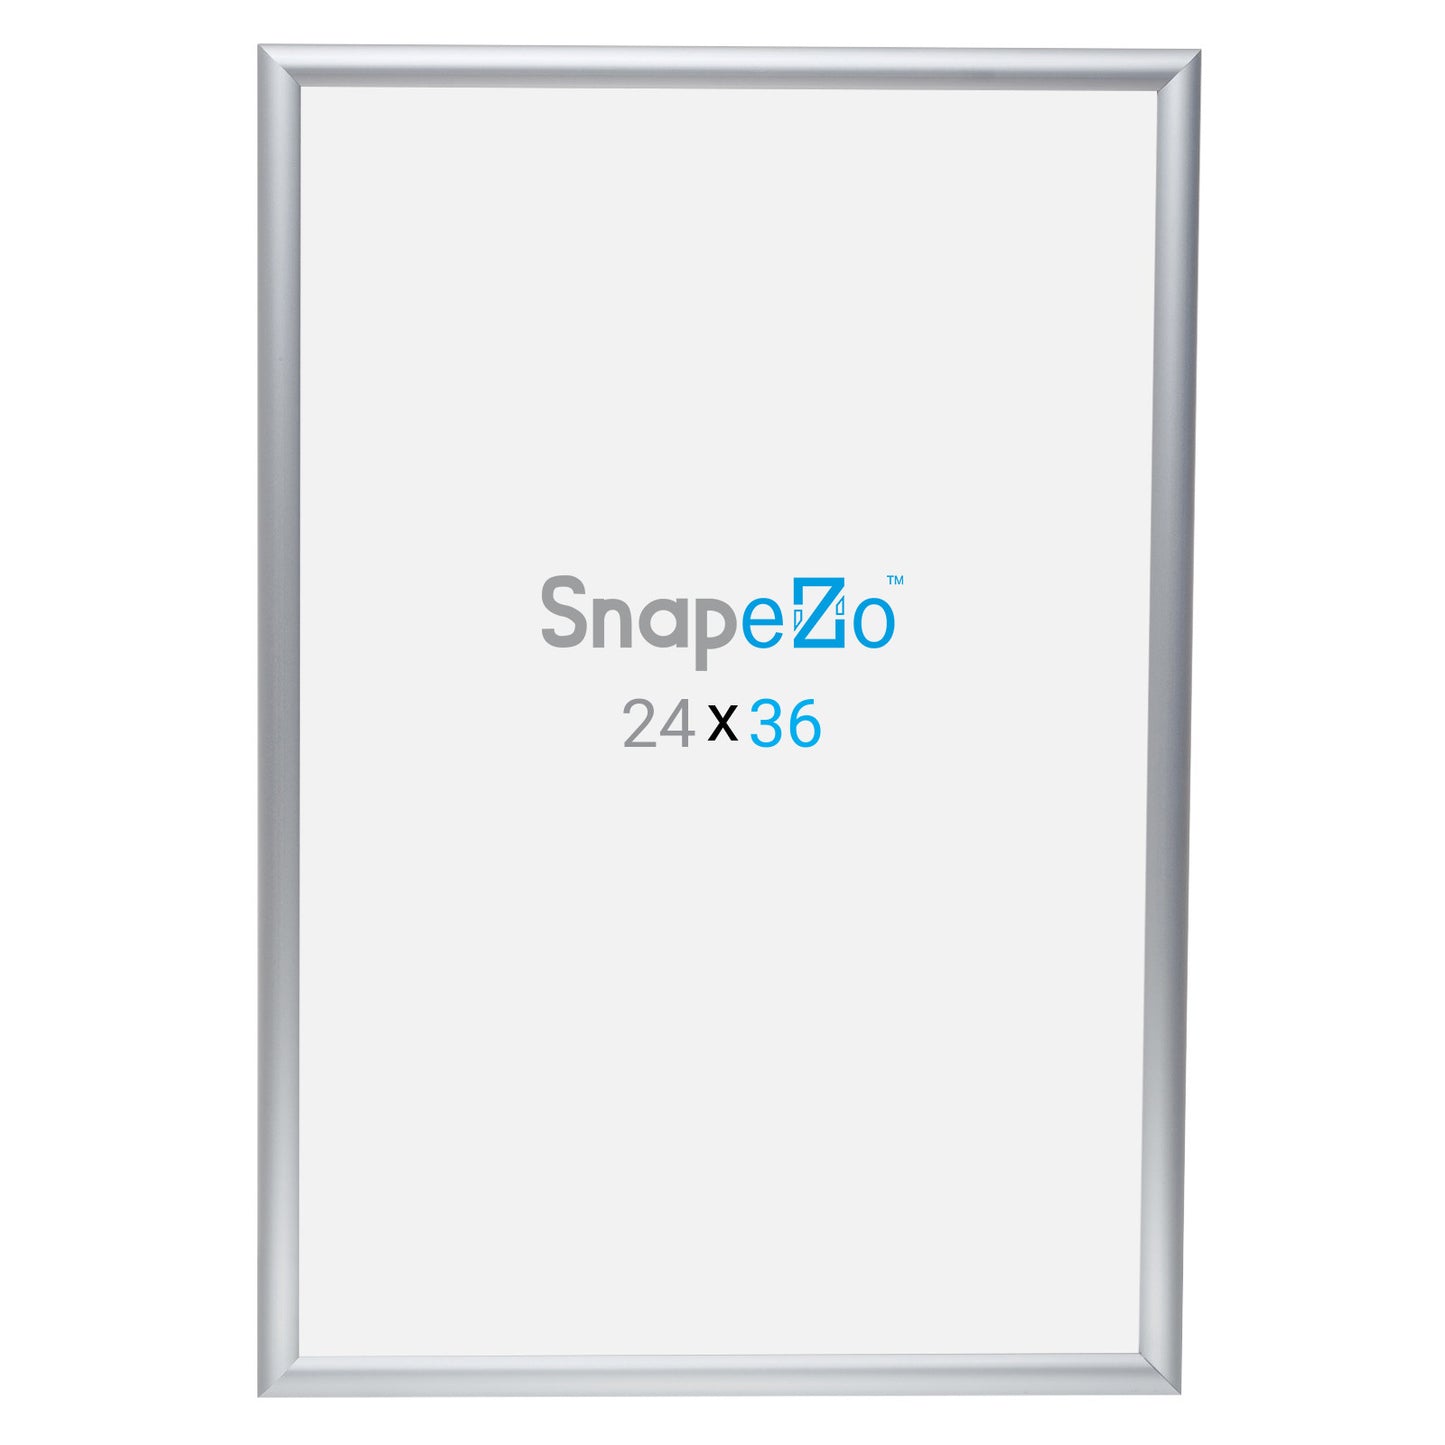 5 Case Pack of Silver 24x36 Movie Poster Frame - 1" Profile